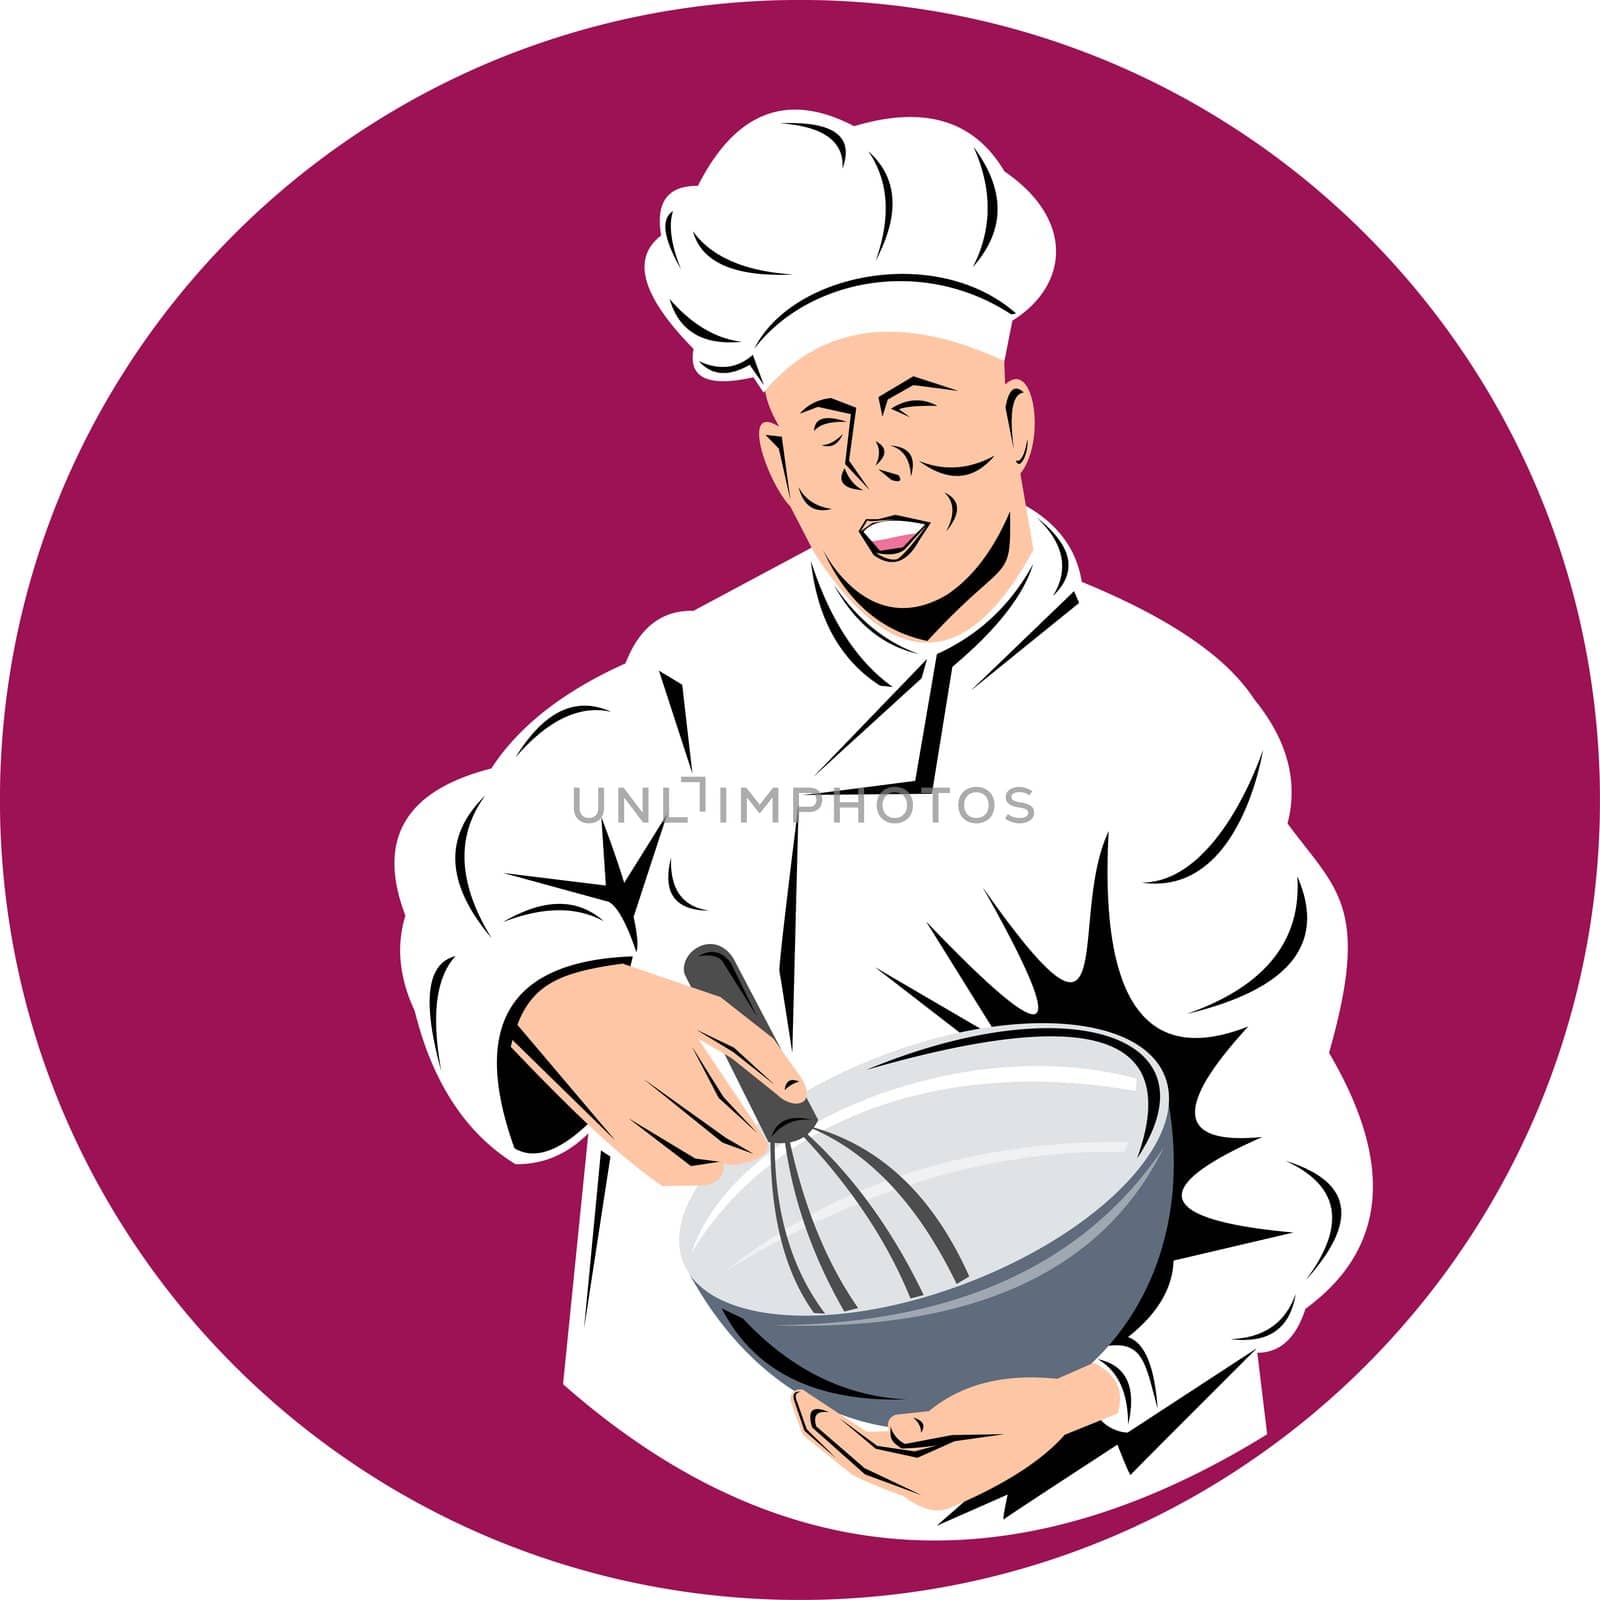 illustration of a chef, cook or baker done in retro style holding mixing bowl